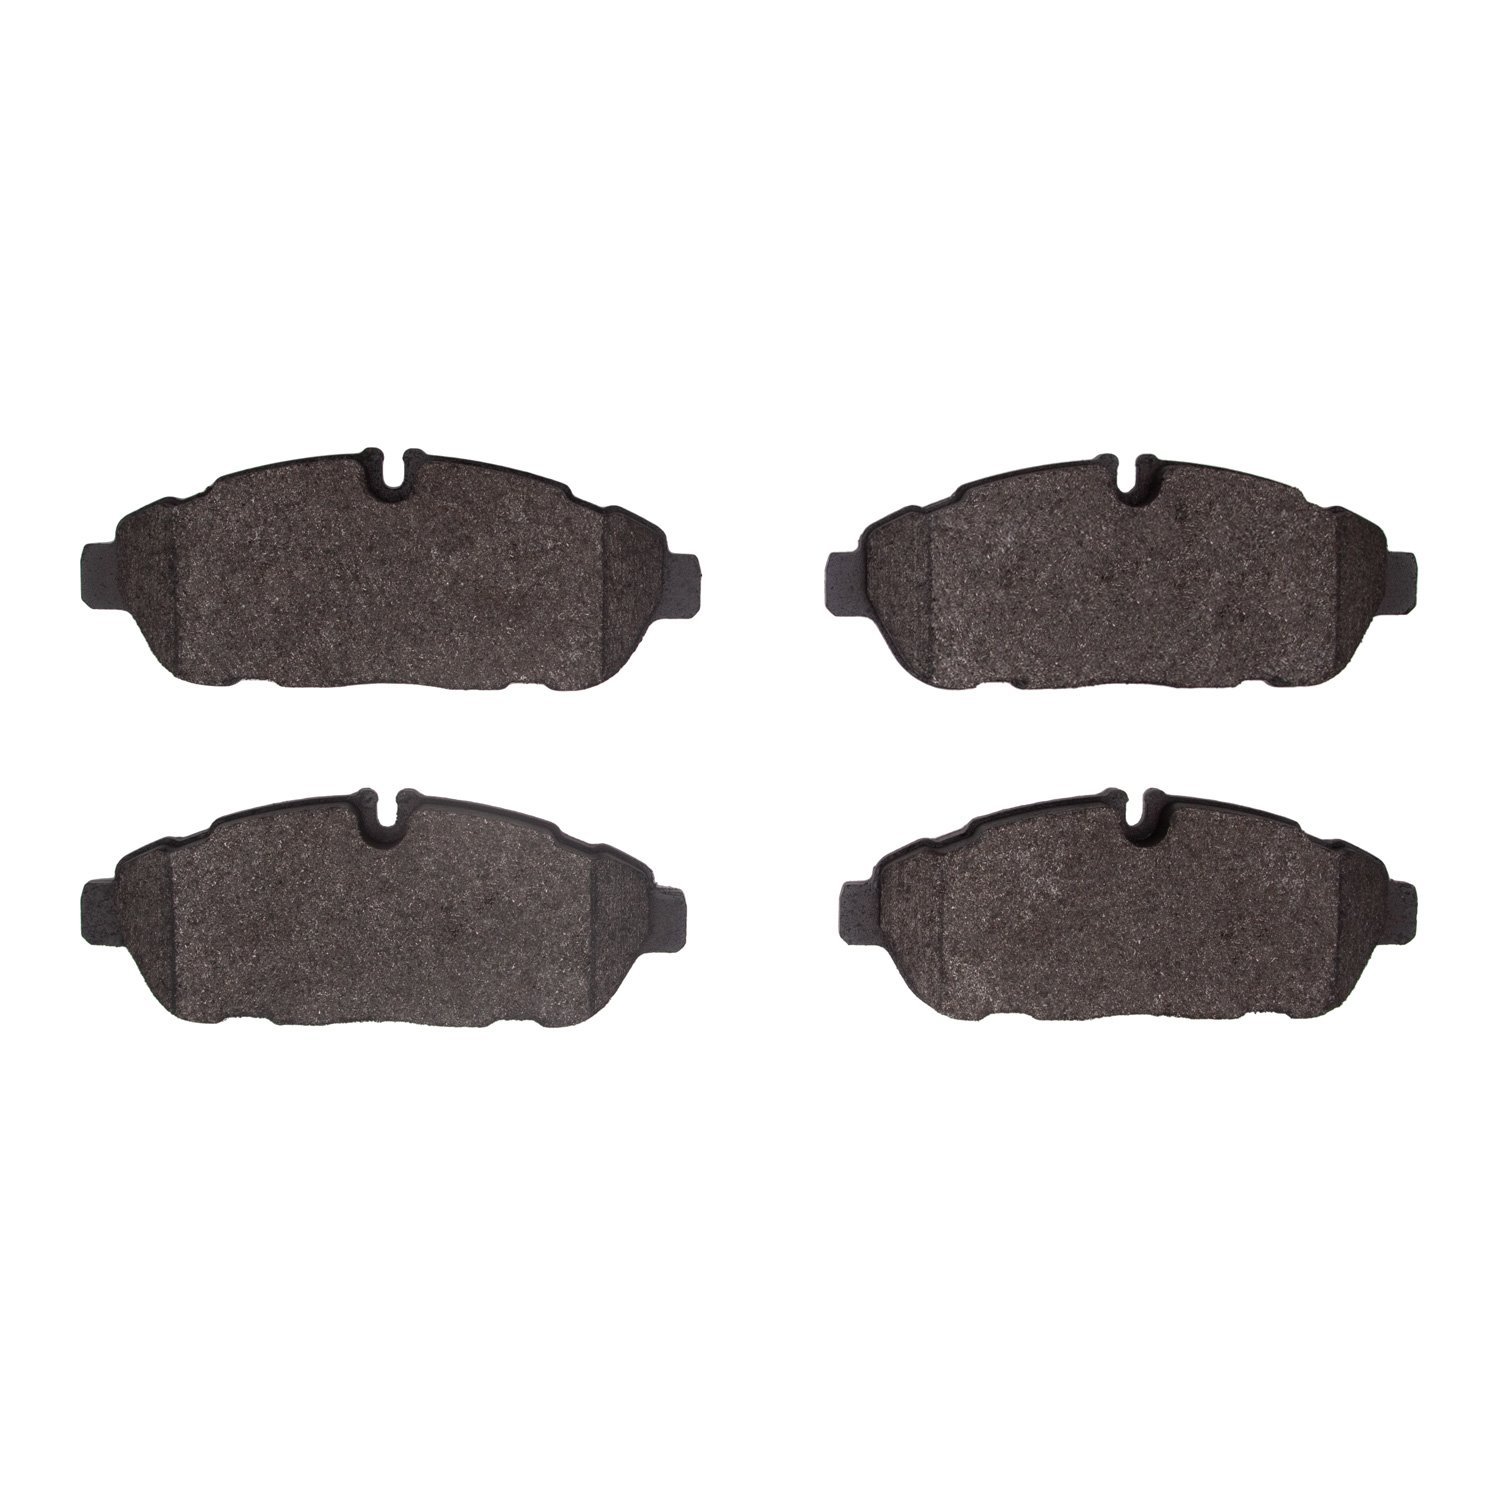 Optimum OE Brake Pads, Fits Select Ford/Lincoln/Mercury/Mazda, Position: Front